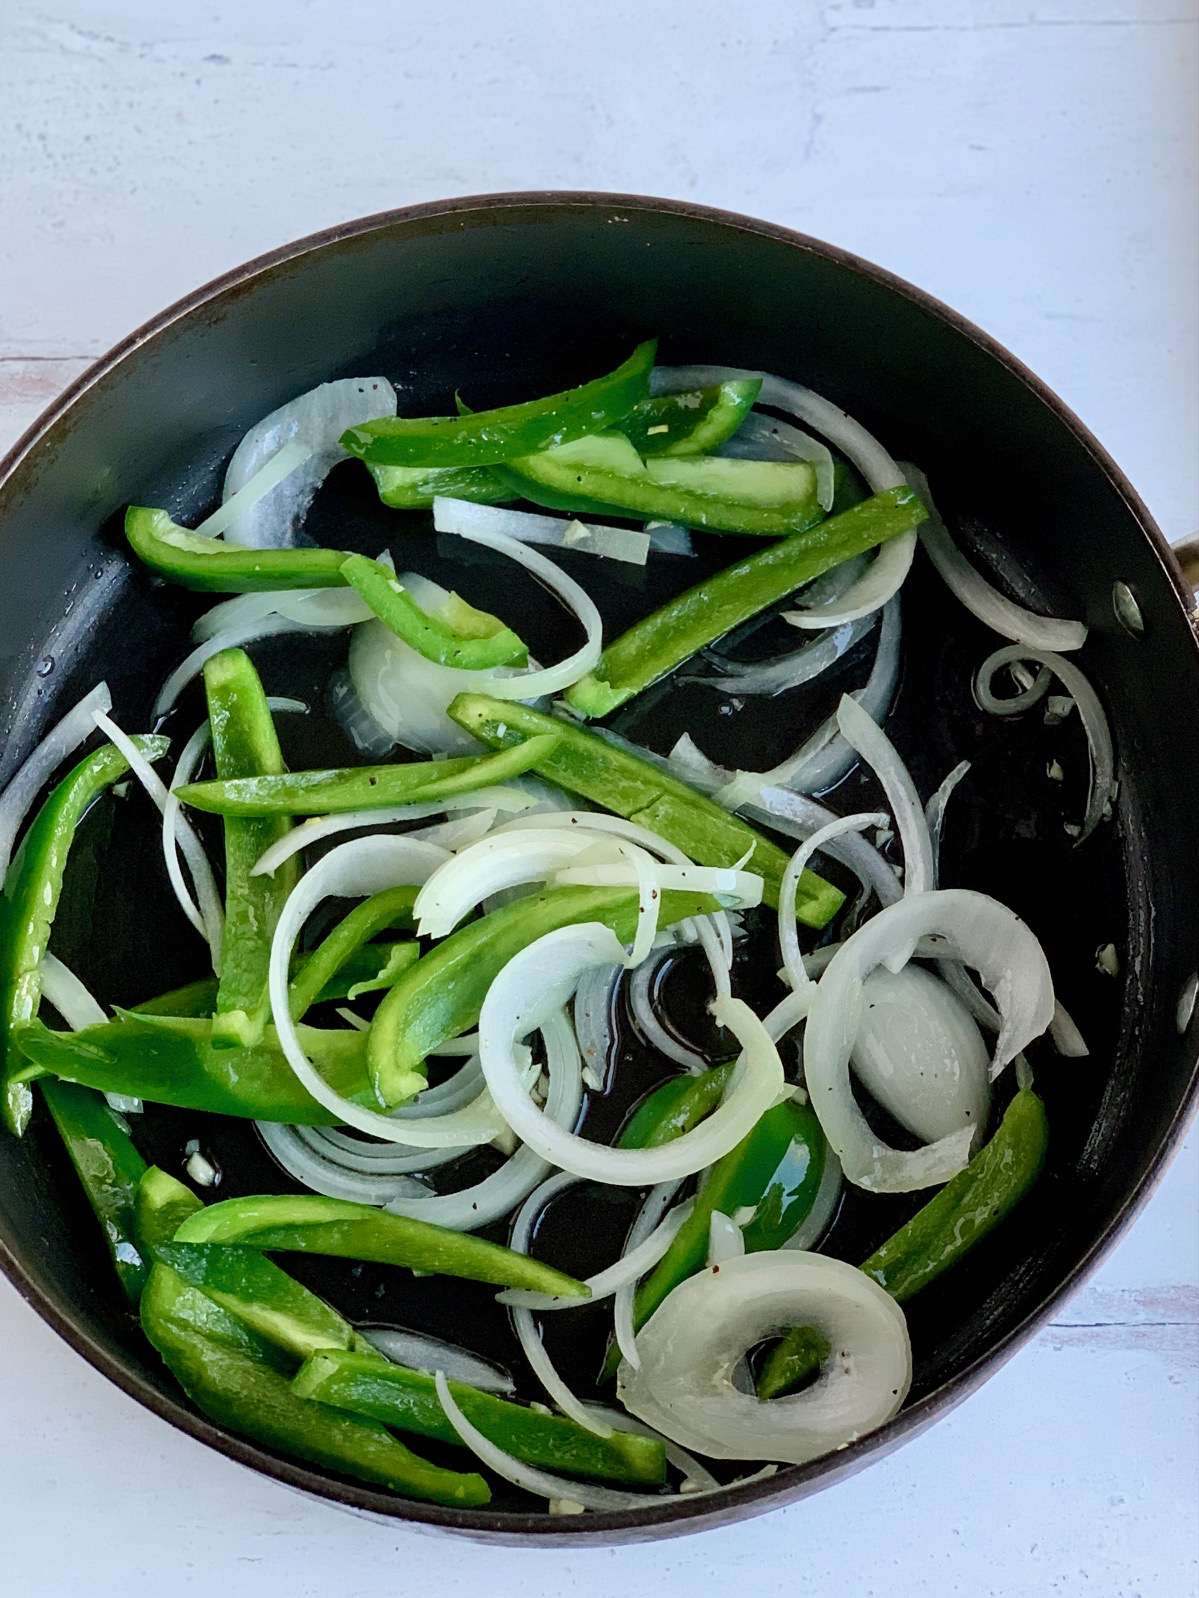 Sautéing sliced onions, garlic, and green bell peppers in a skillet